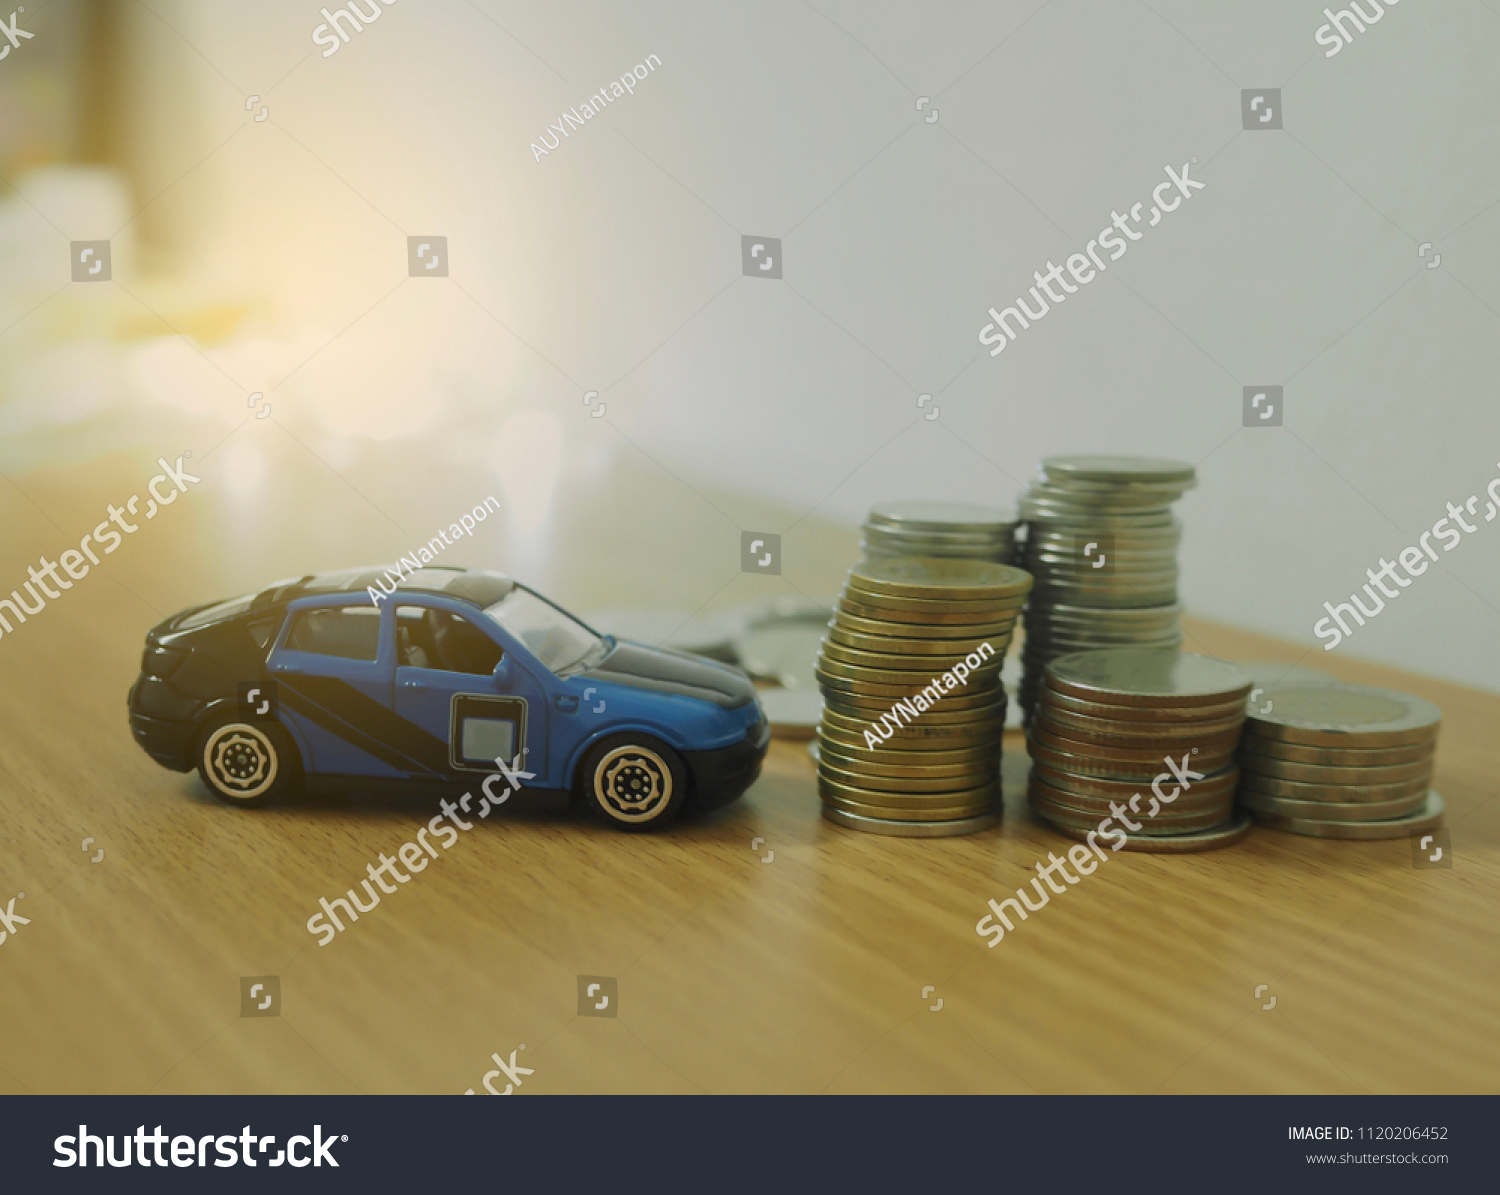 Closed Soft Focus Car Model Coins Stock Photo Edit Now 1120206452 - closed up and soft focus car model with coins finance and loan concept saving money image